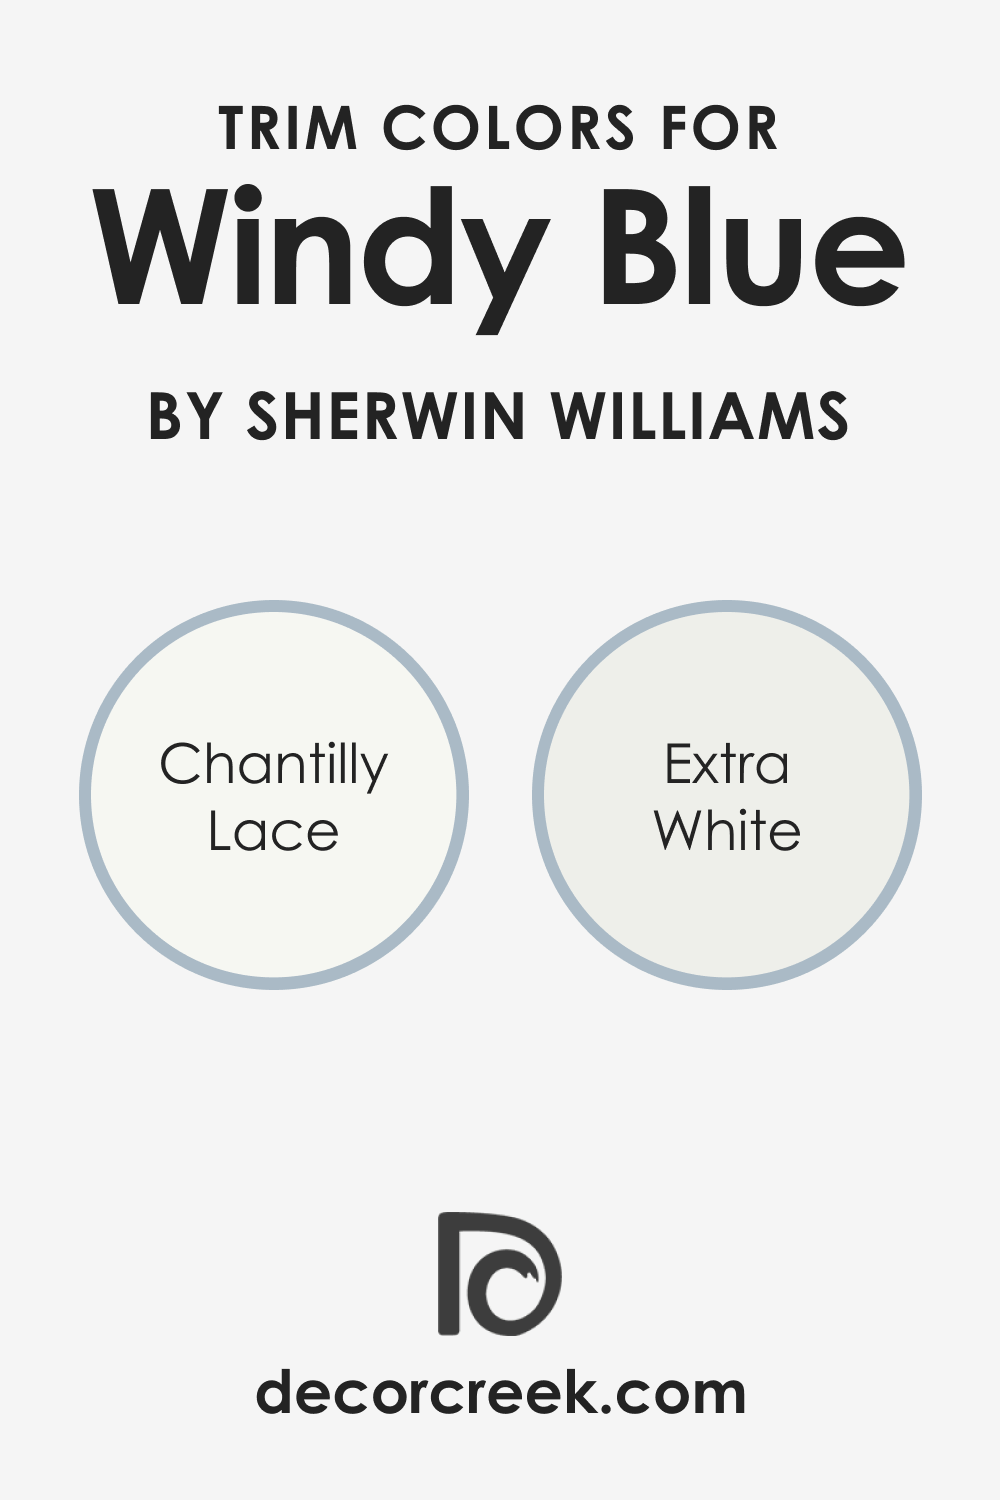 What Is the Best Trim Color to Use With SW Windy Blue?